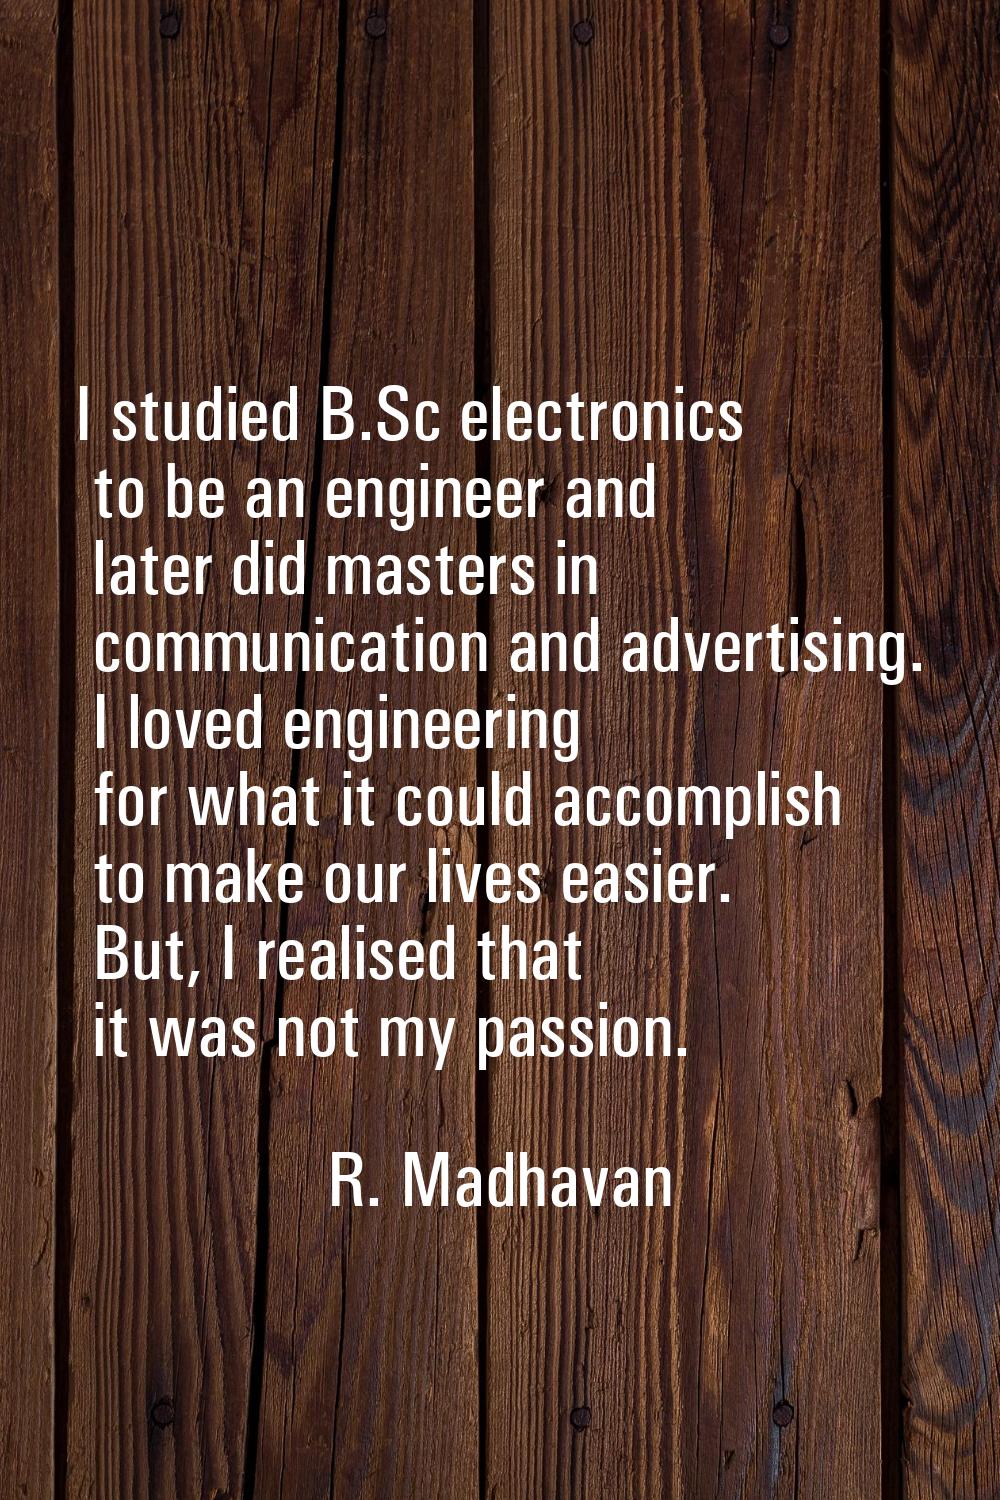 I studied B.Sc electronics to be an engineer and later did masters in communication and advertising